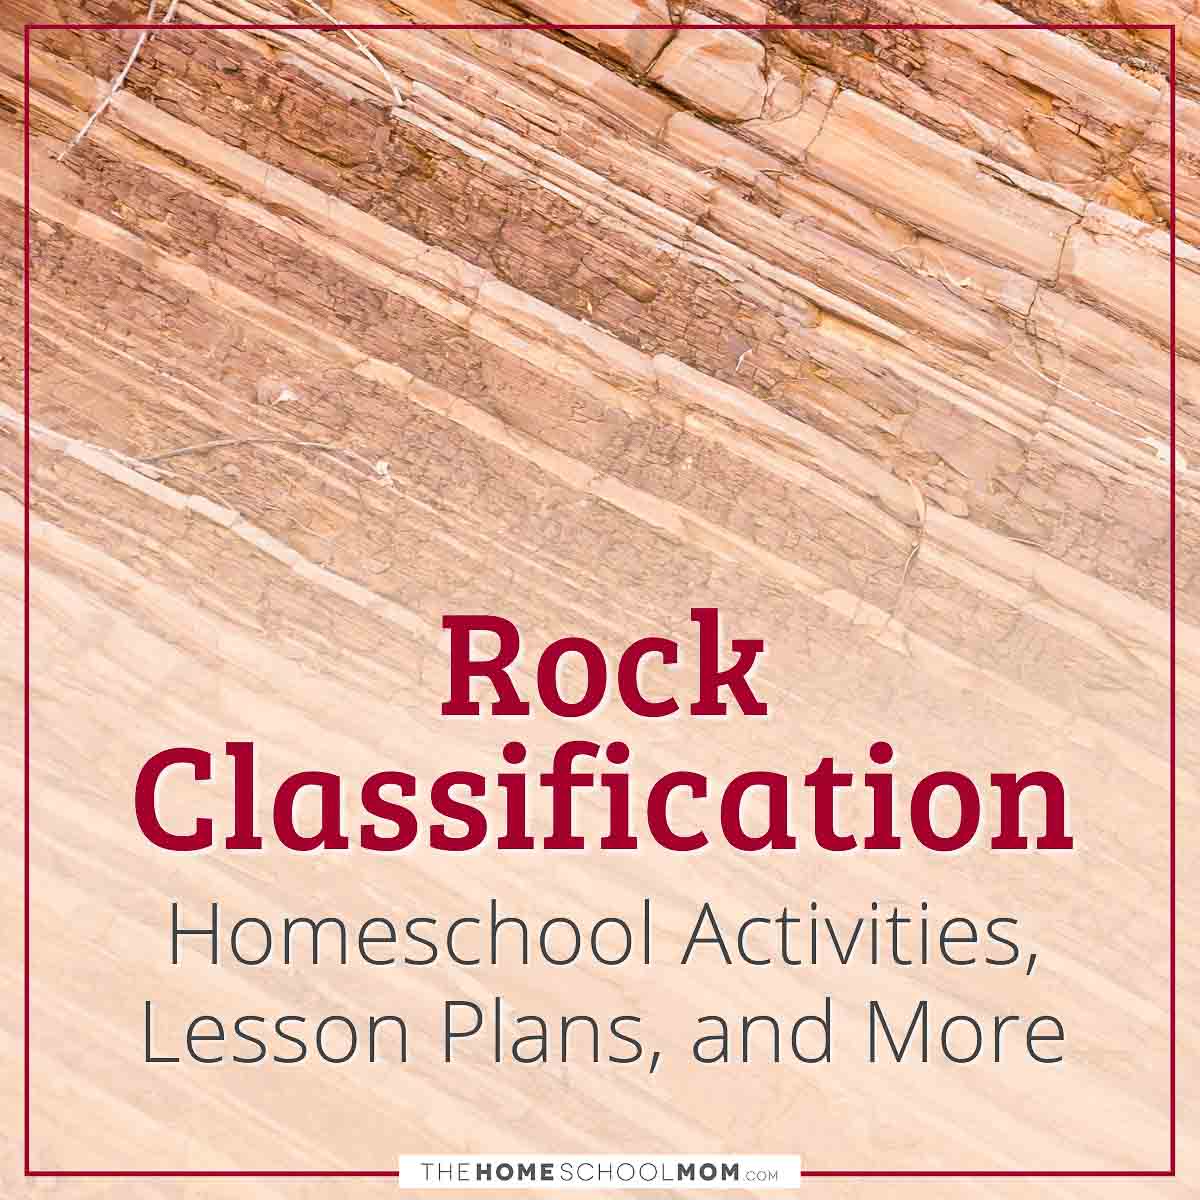 Rock Classification Homeschool Activities, Lesson Plans, and More.